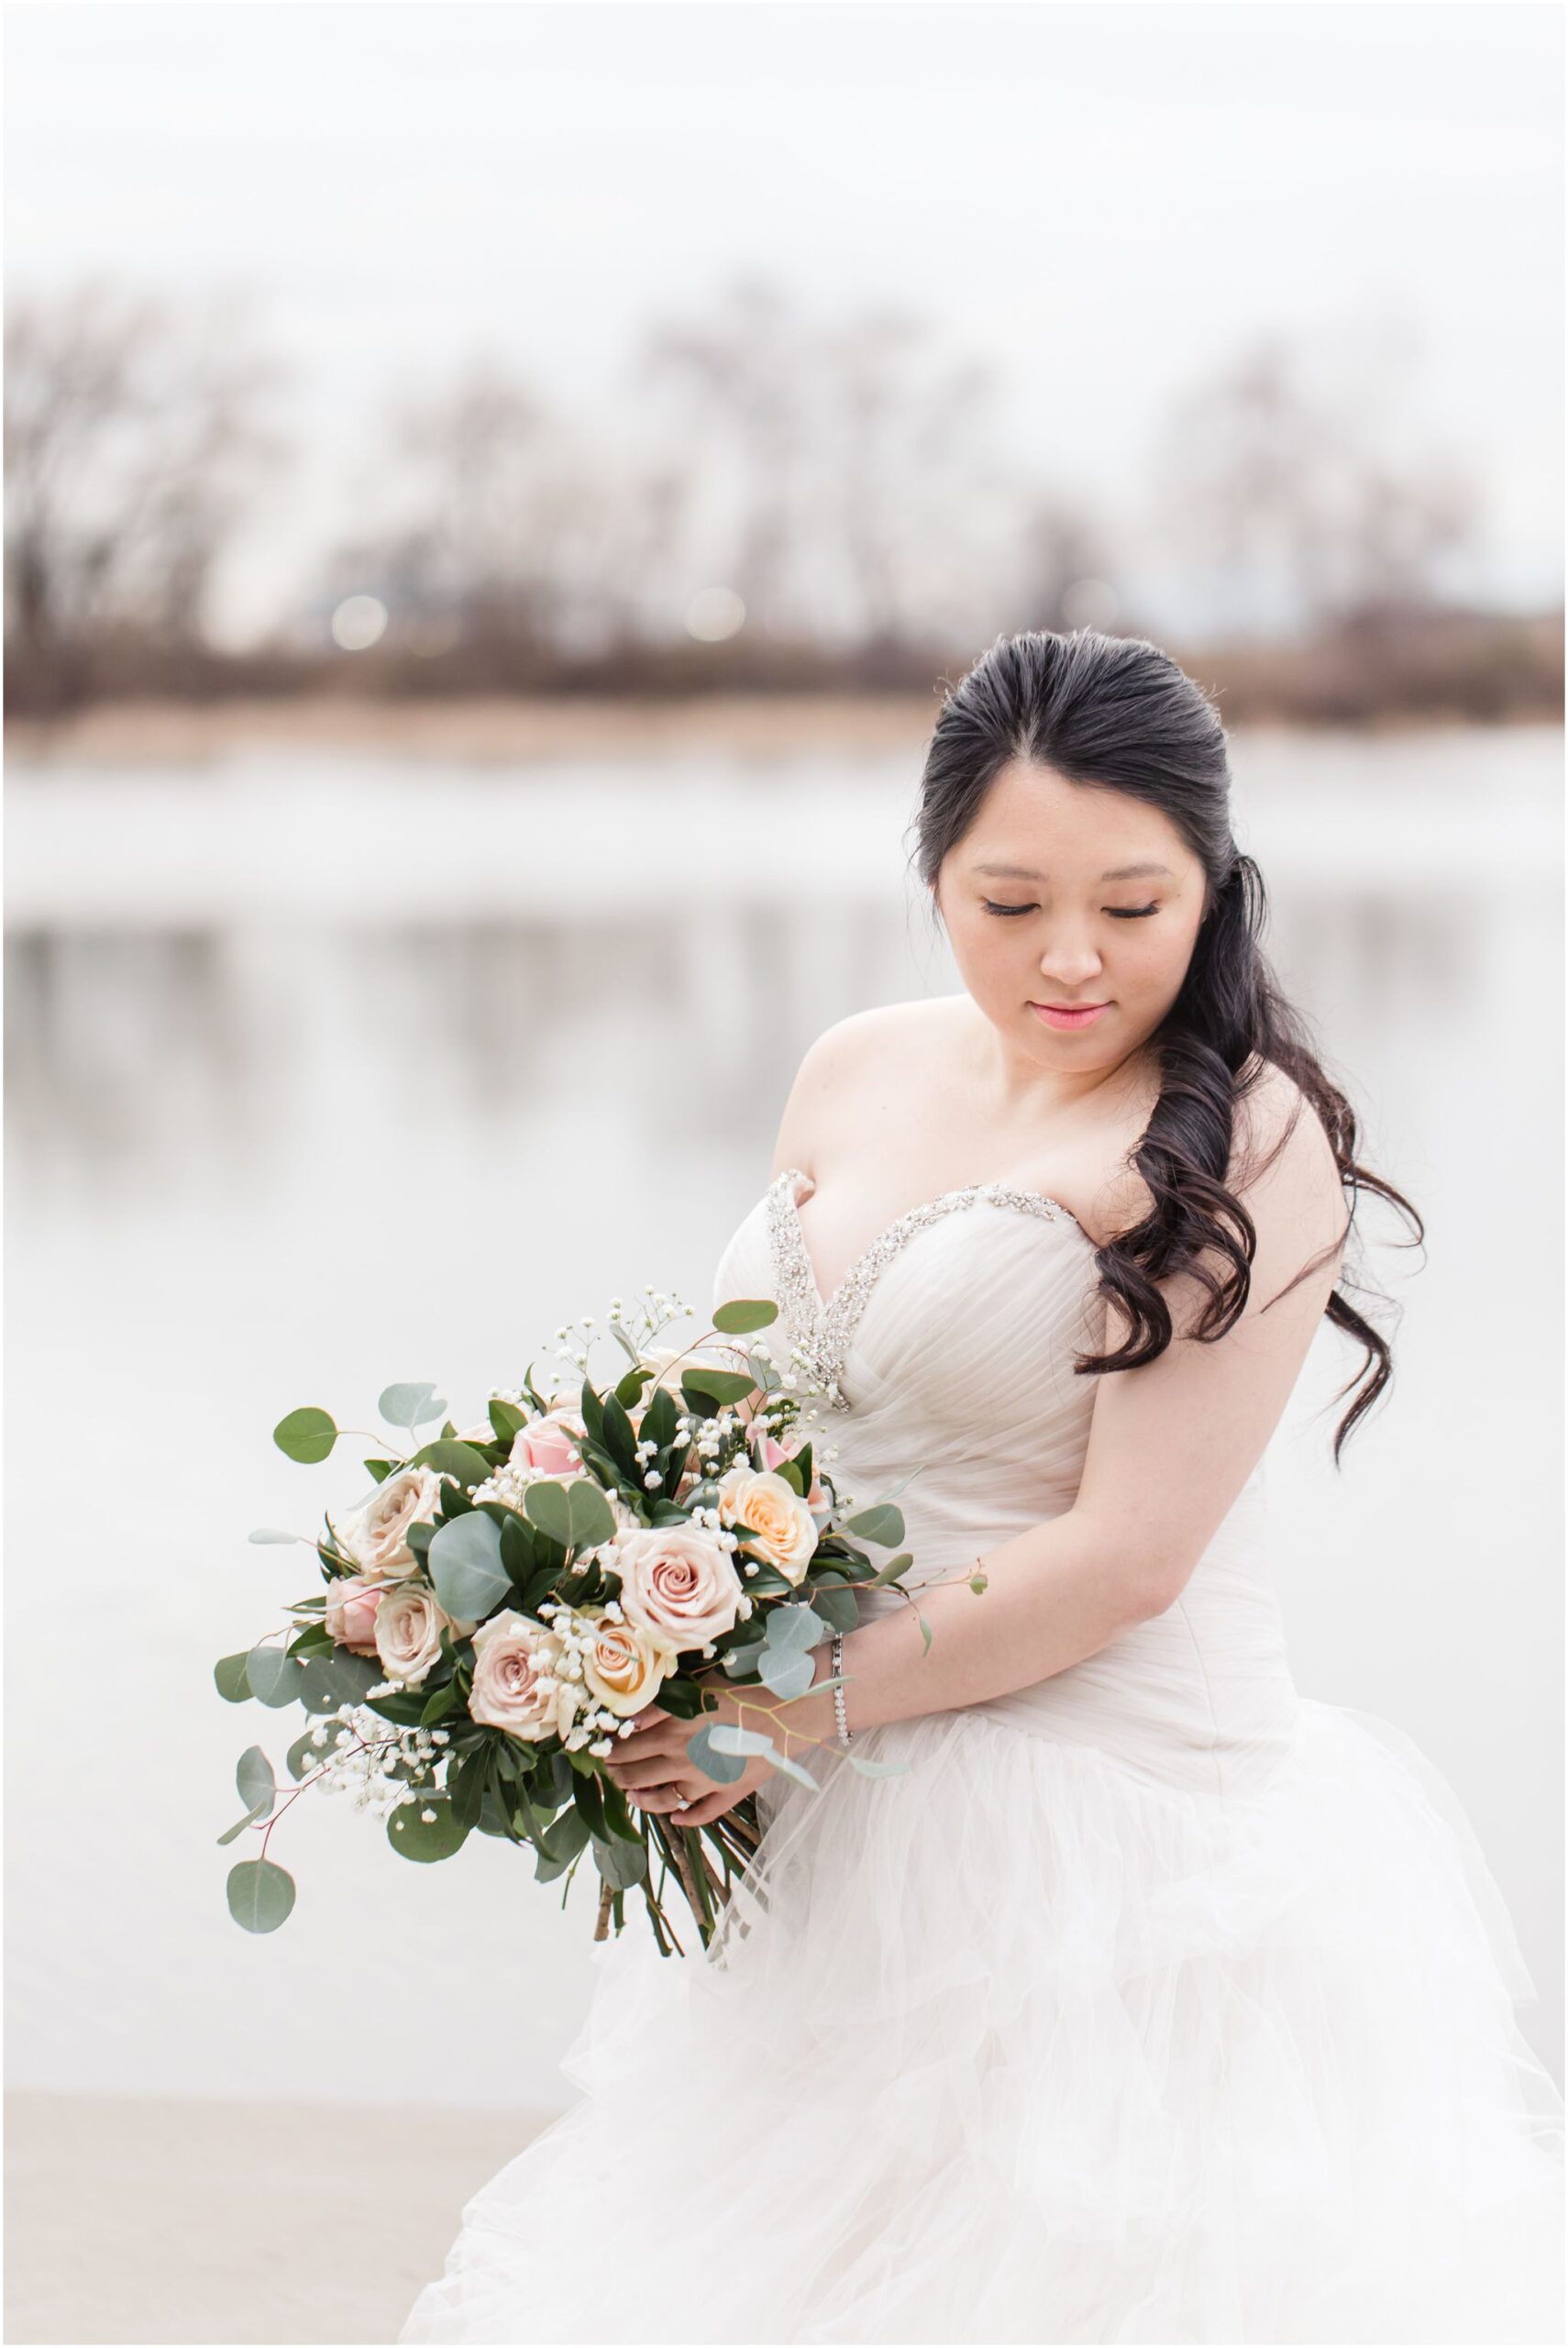 Elegant UBC Boathouse Winter Wedding Bridal Portrait with Blush Rose Bouquet in December by Vivian Ng Photography